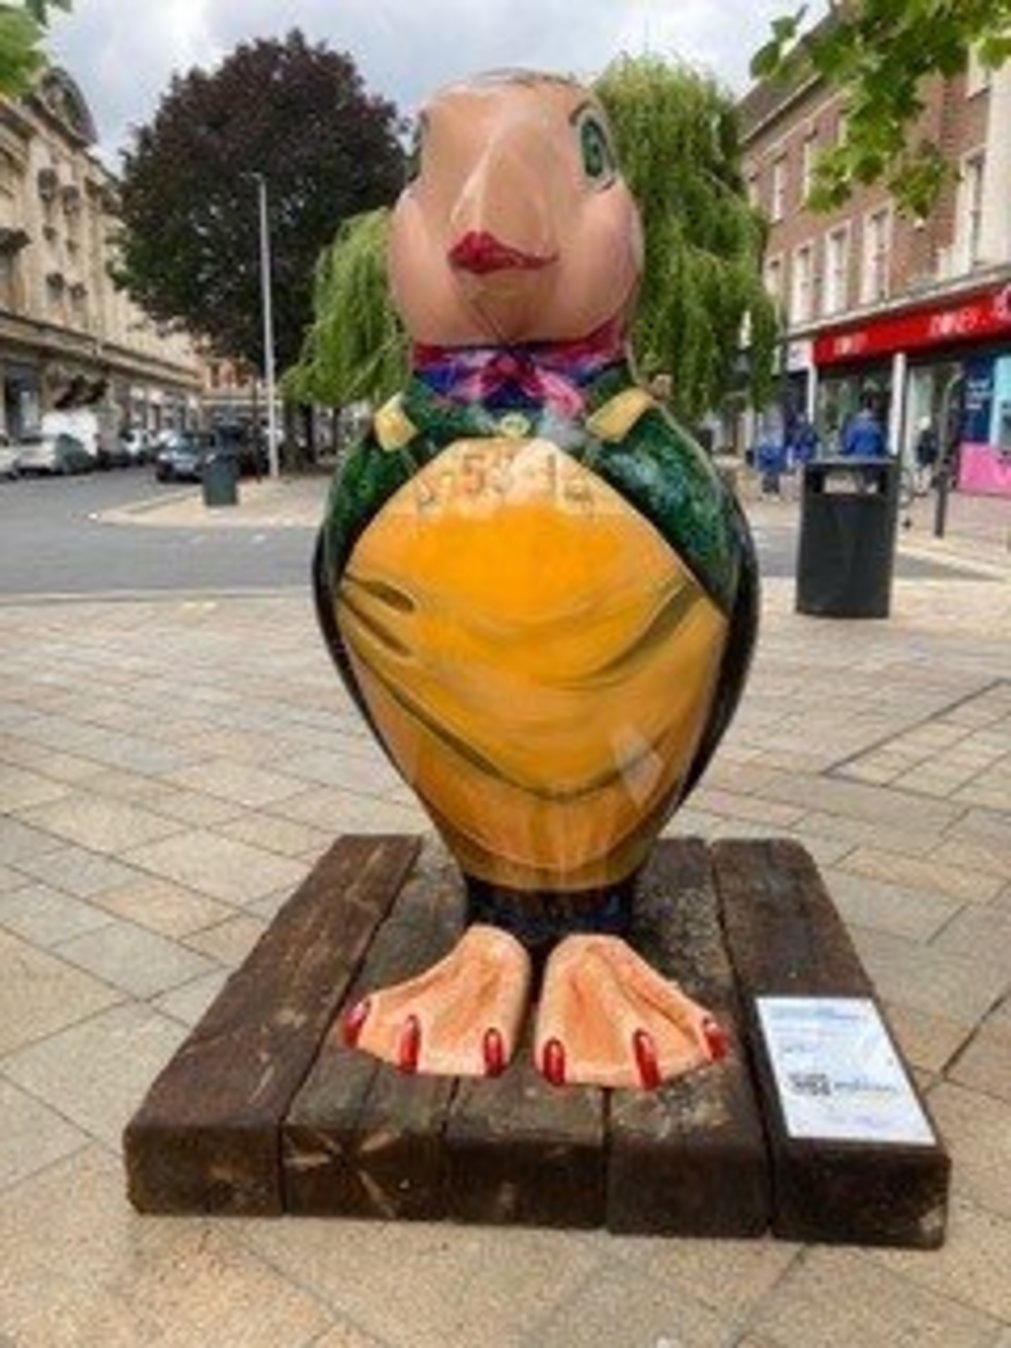 First puffins unveiled as part of East Yorkshire animal sculpture trail